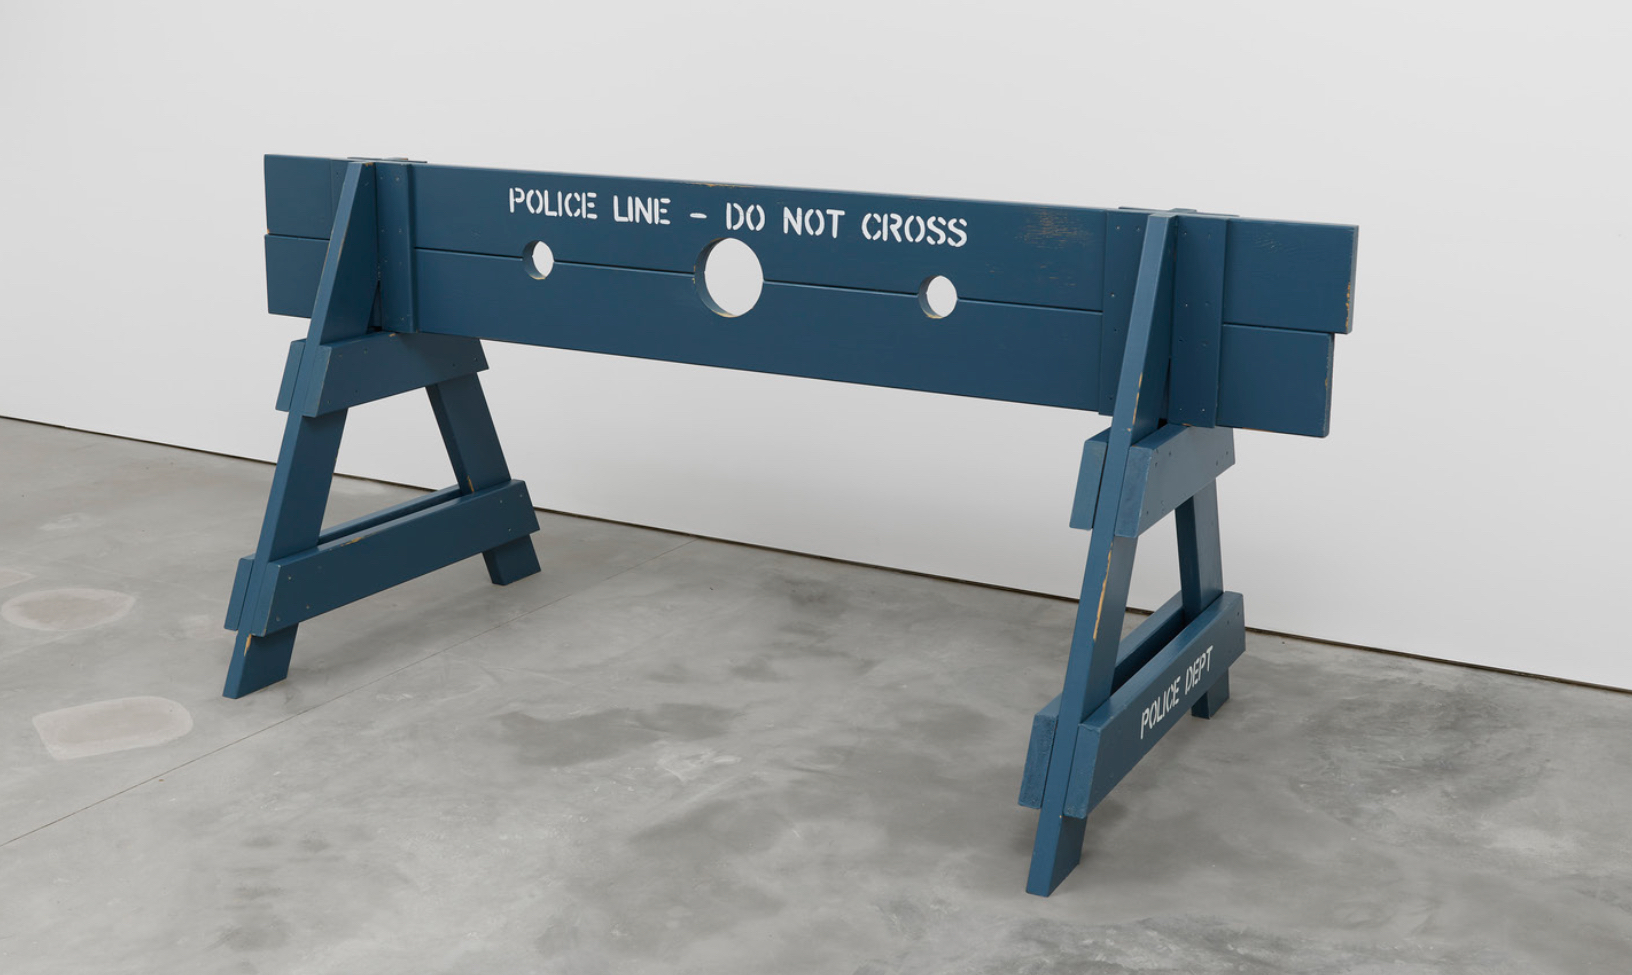 Image credit: Hugh Hayden, “Pillory,” 2020. Milk paint on cedar with stainless steel hardware and locks, 44 x 96 x 42 inches. 